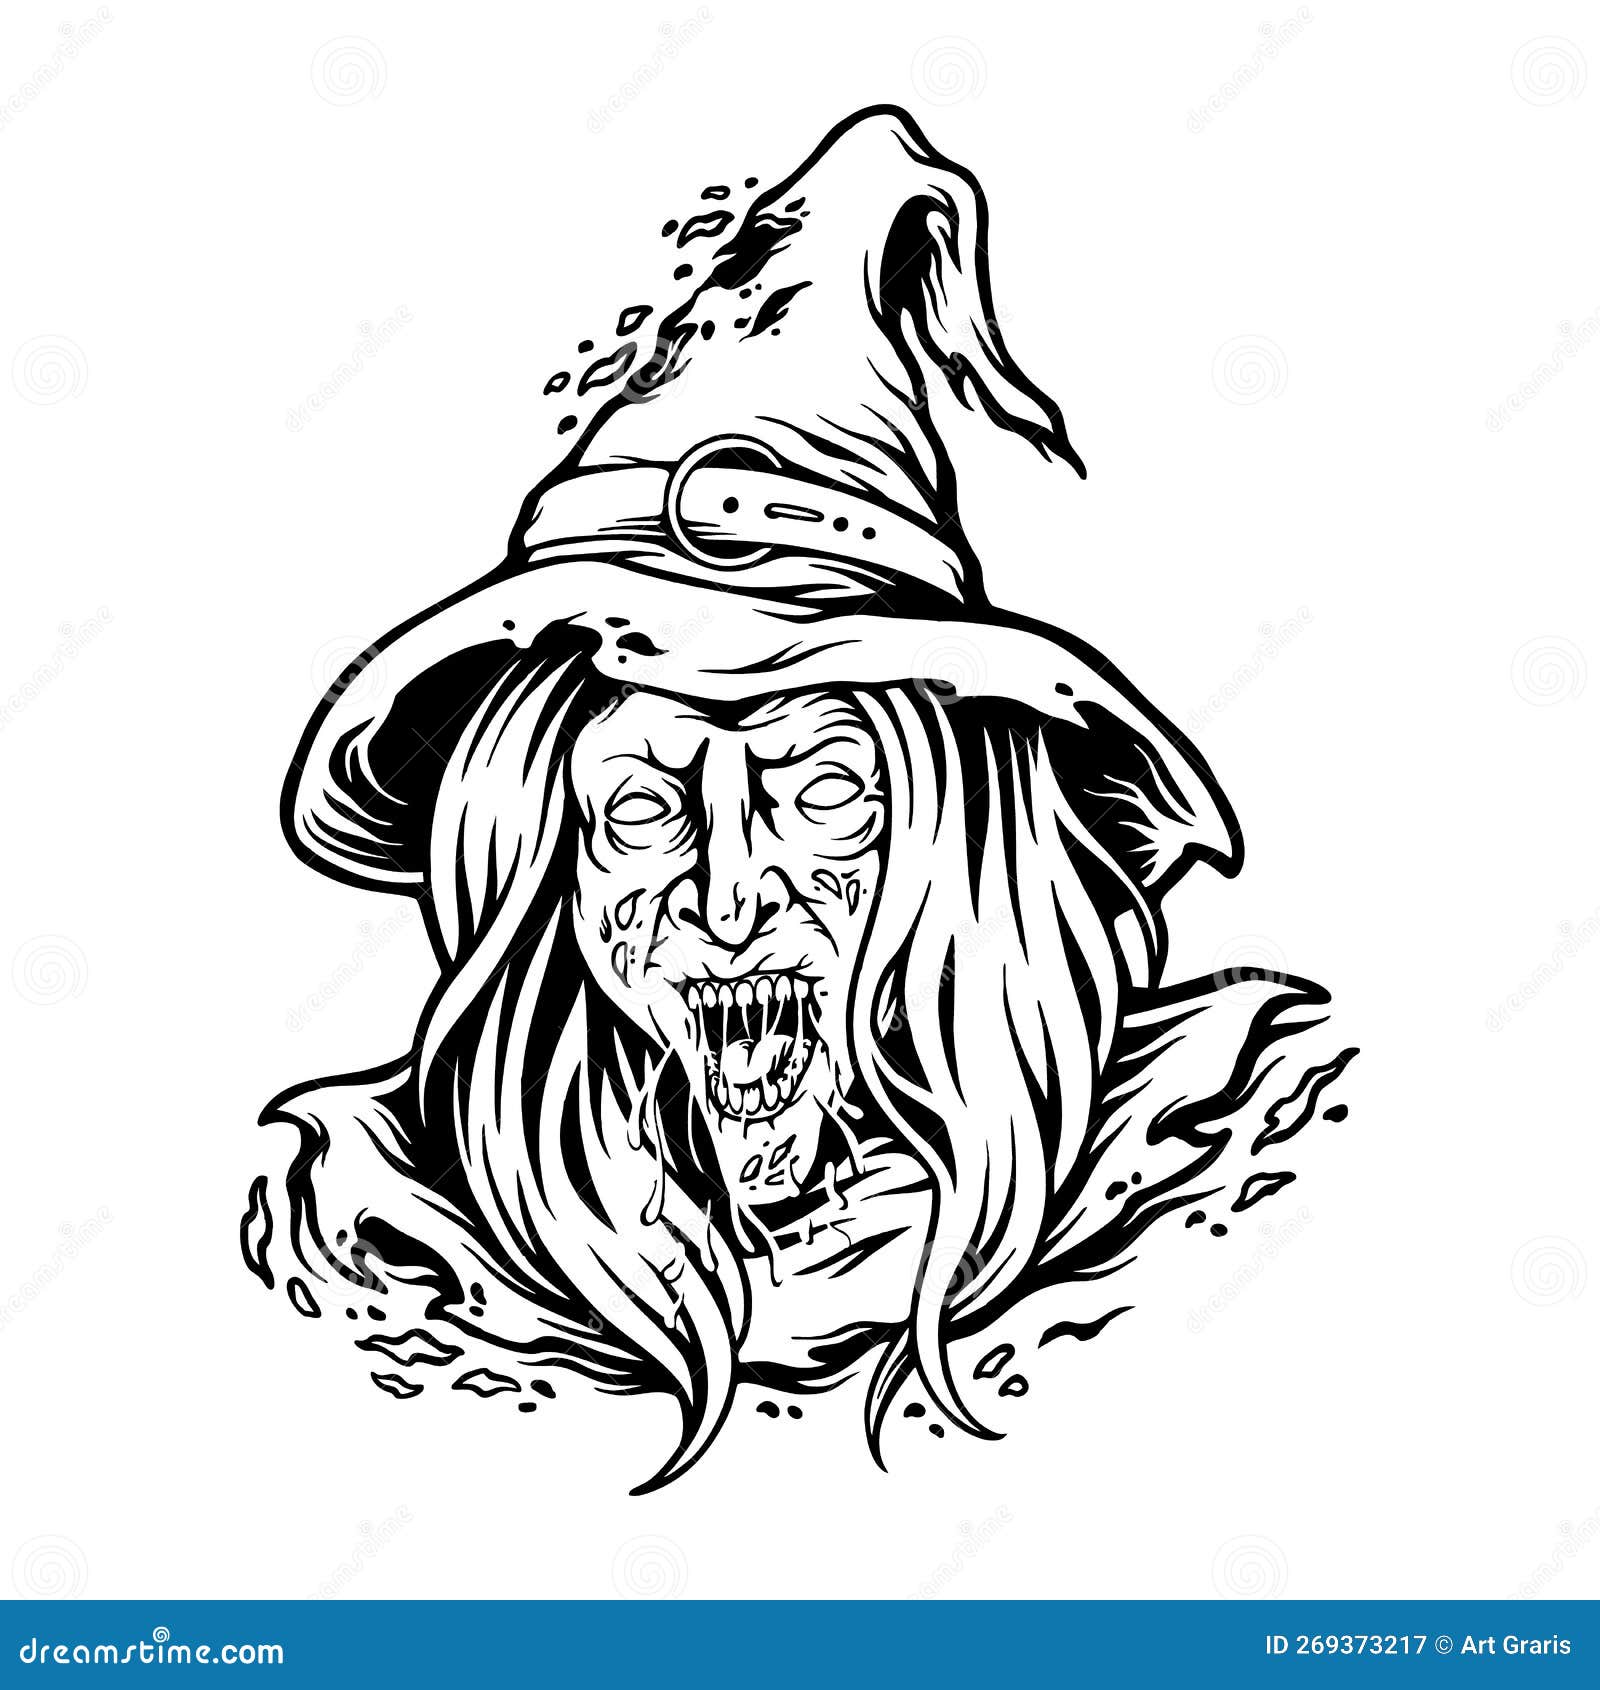 Witch Face Creepy Halloween Clipart